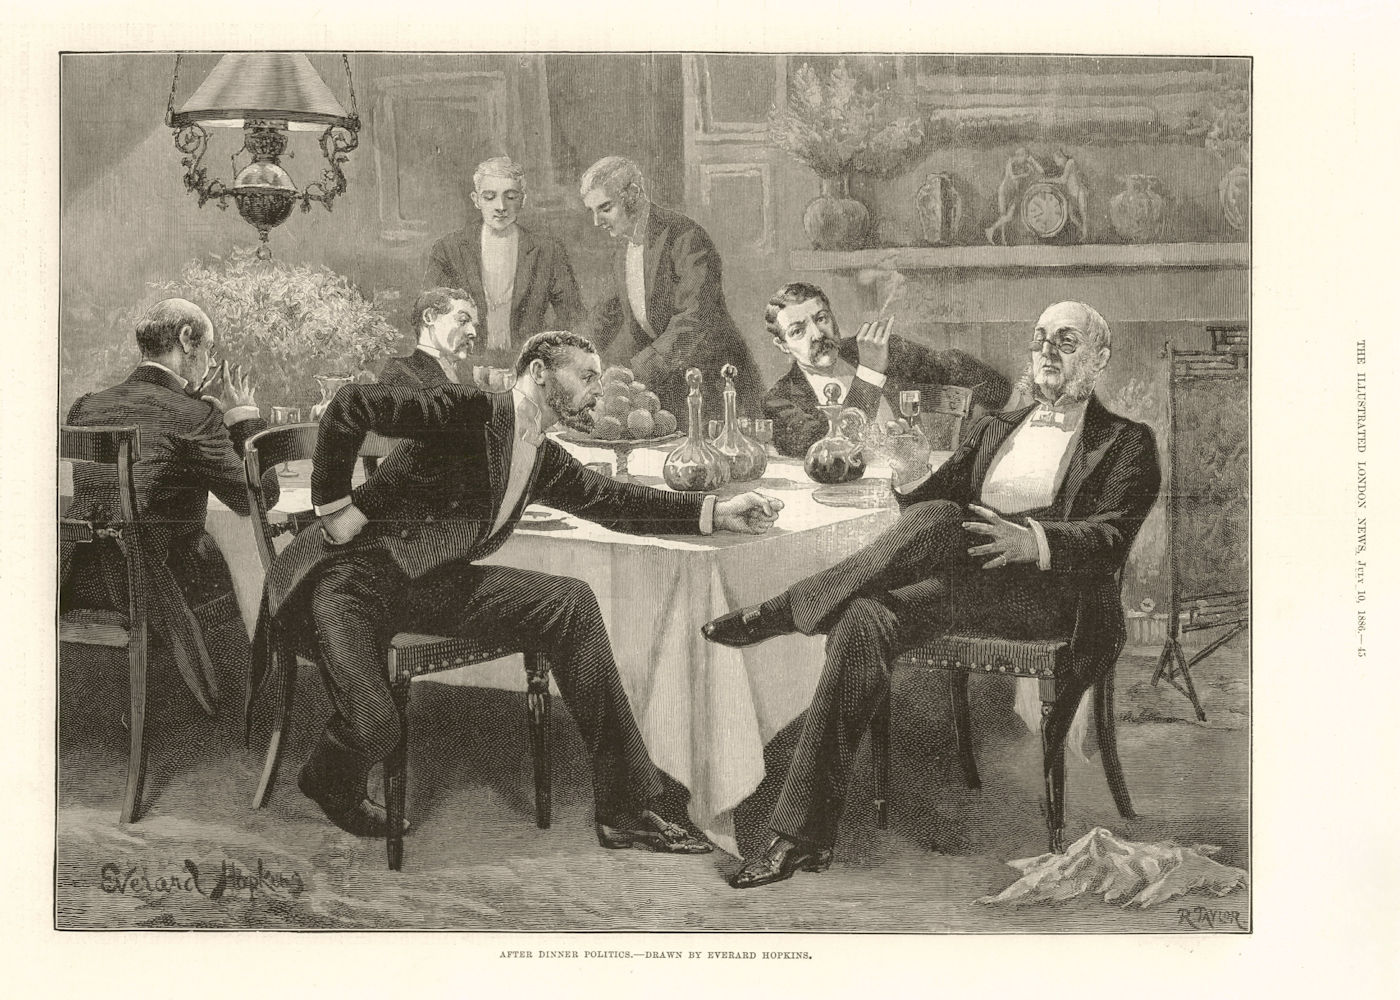 Associate Product After-dinner politics. Fine Arts. Society 1886 antique ILN full page print